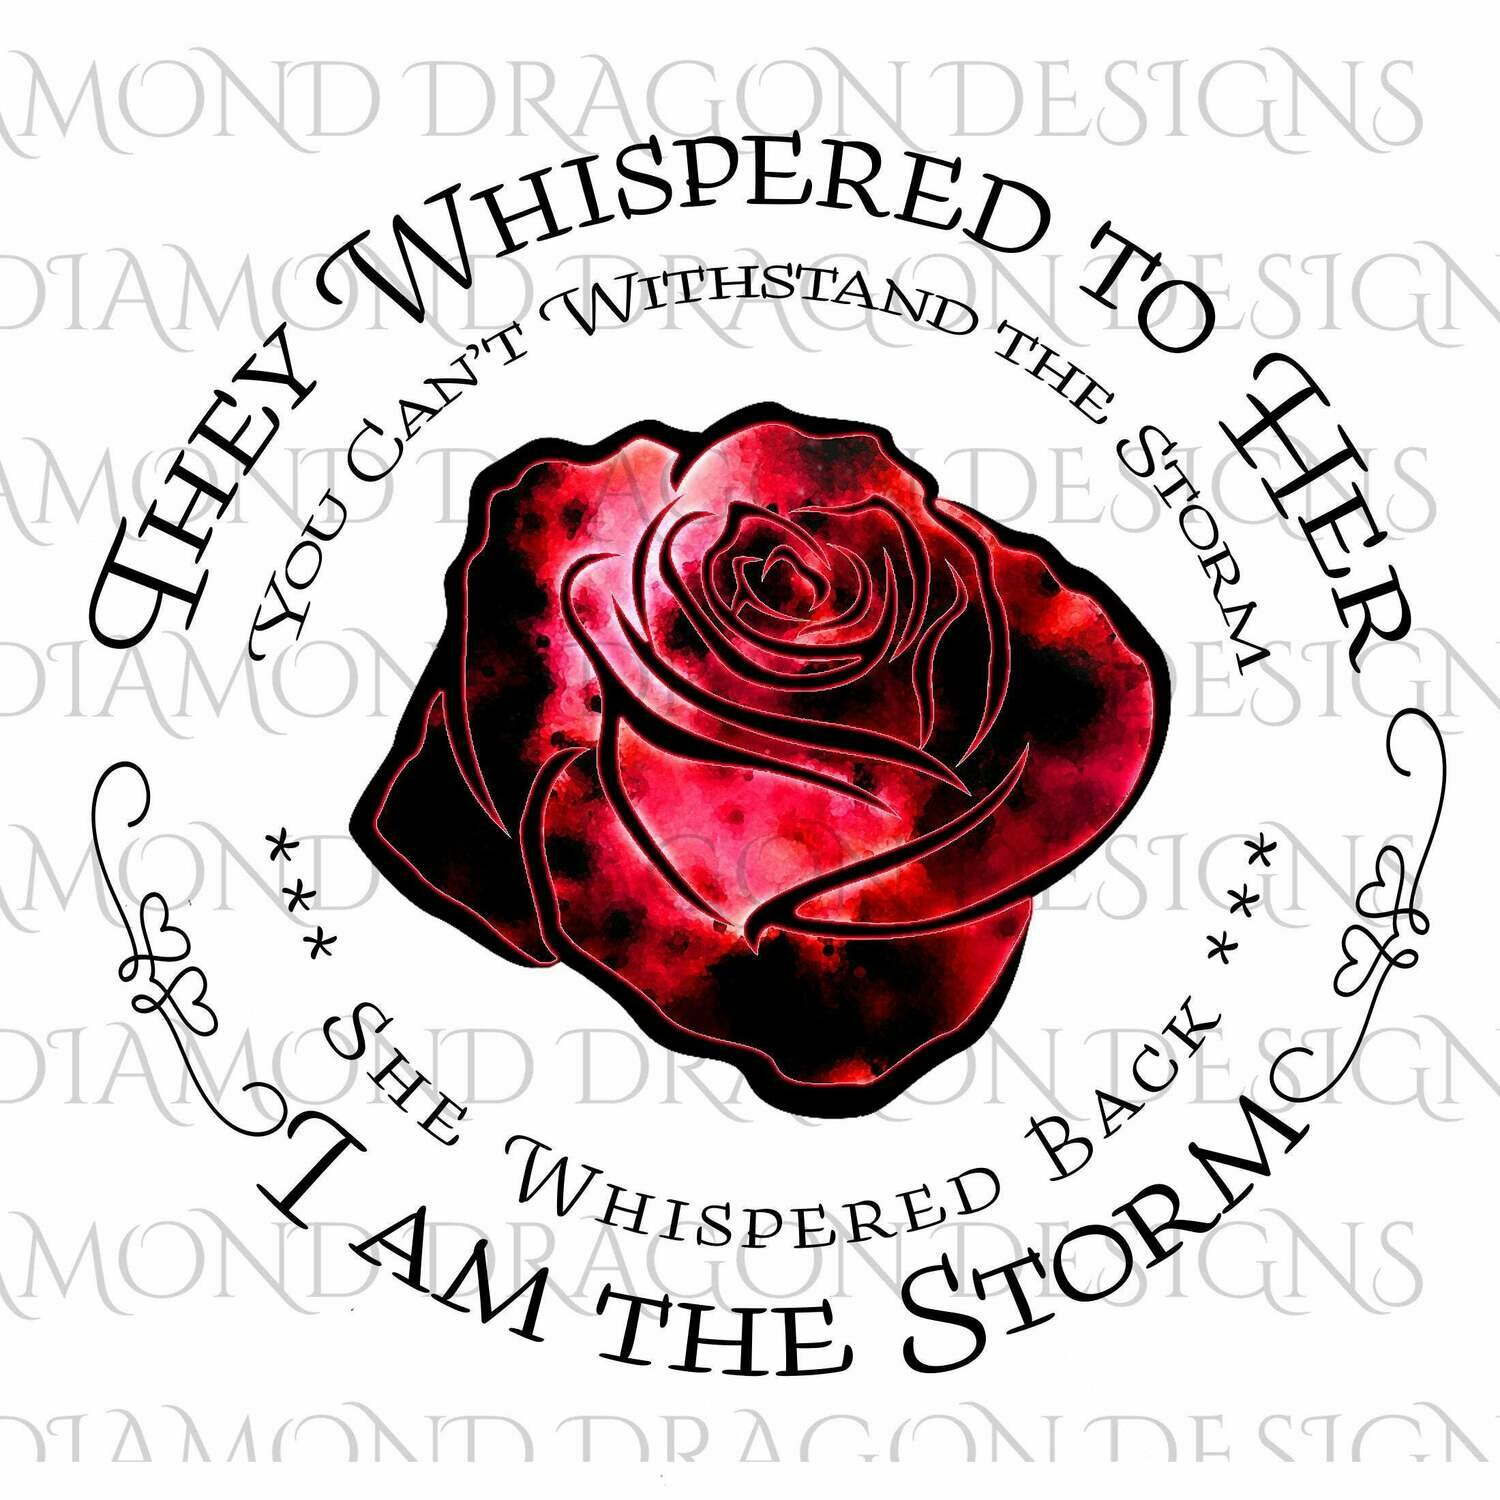 Flowers - They Whispered to Her, Cannot Withstand the Storm, I am the Storm, Quote, Red Galaxy Rose, Waterslide